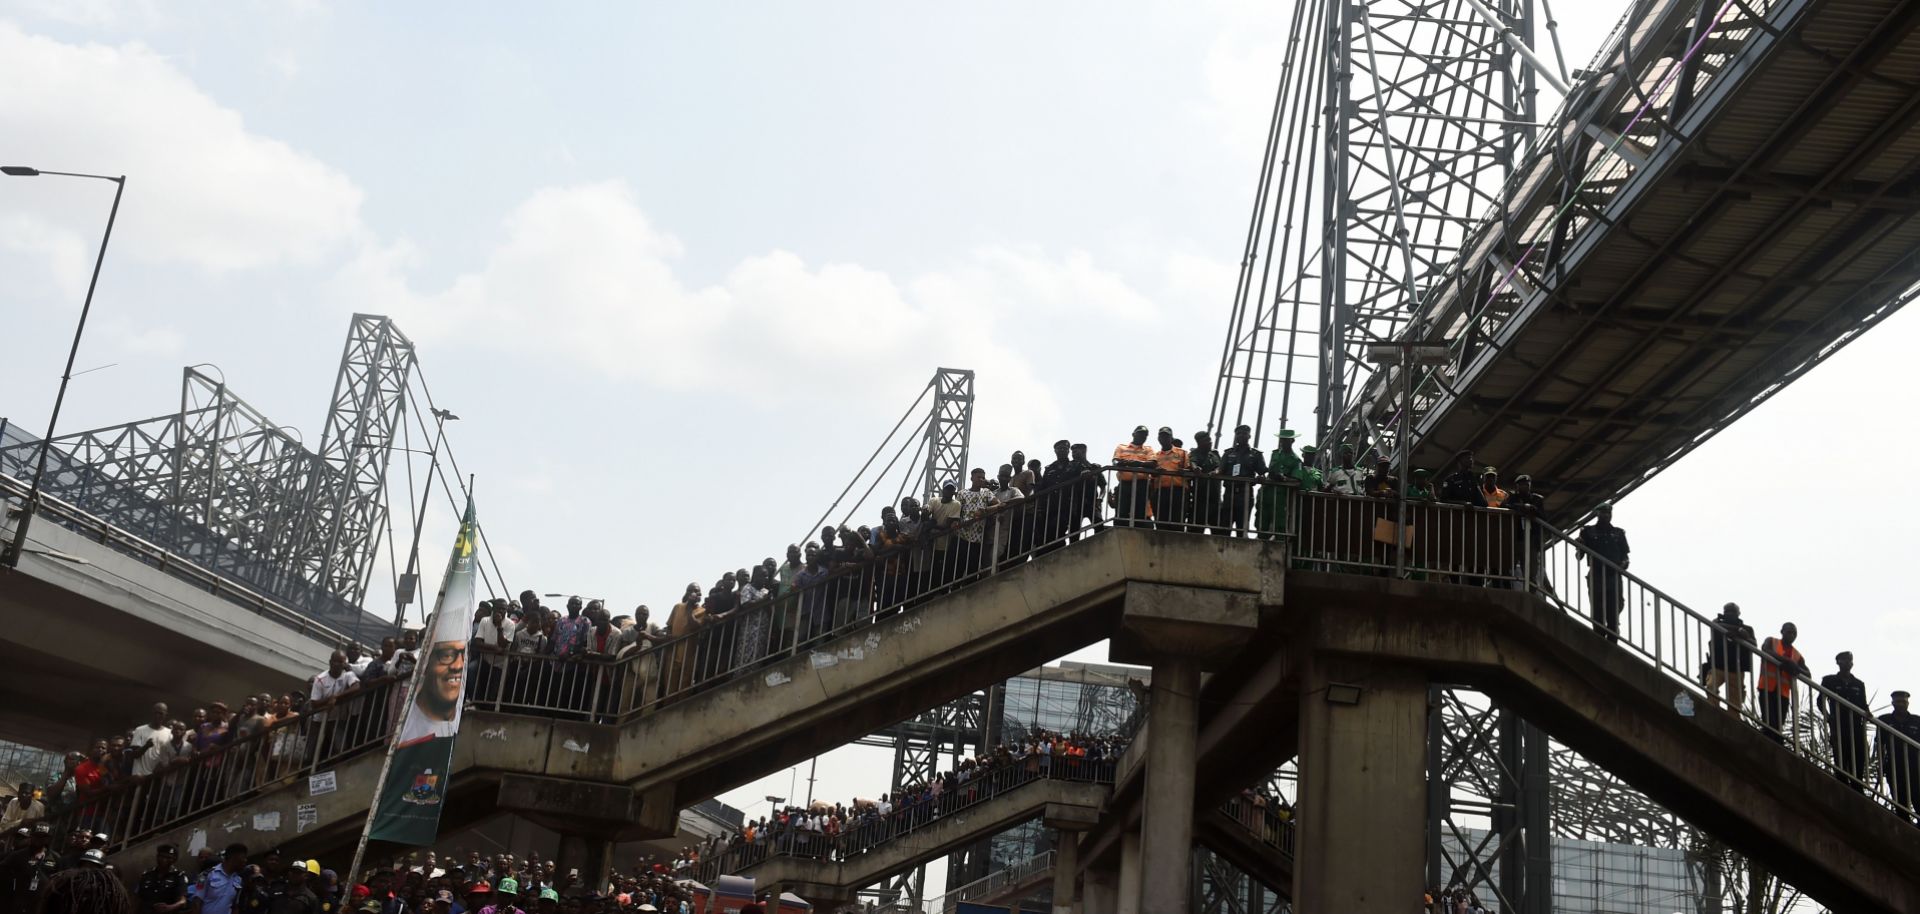 People attend the inauguration of the Oshodi Transport Interchange, a multistory bus terminal in Lagos, Nigeria, on April 24, 2019.